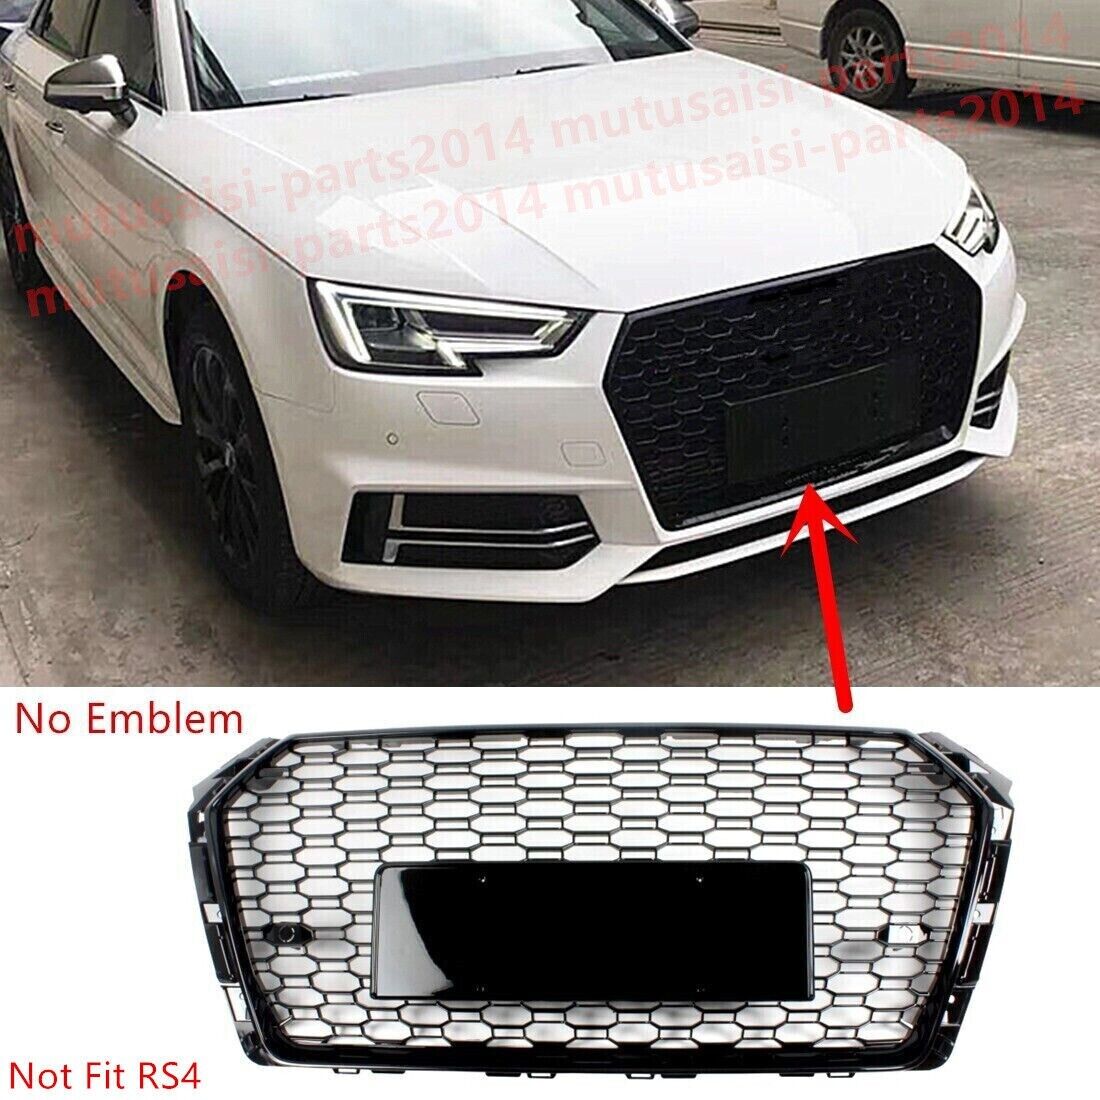 Gloss Black RS4 Style Fits 2017-2019 AUDI A4 S4 S-line Front Bumper Grille Grill